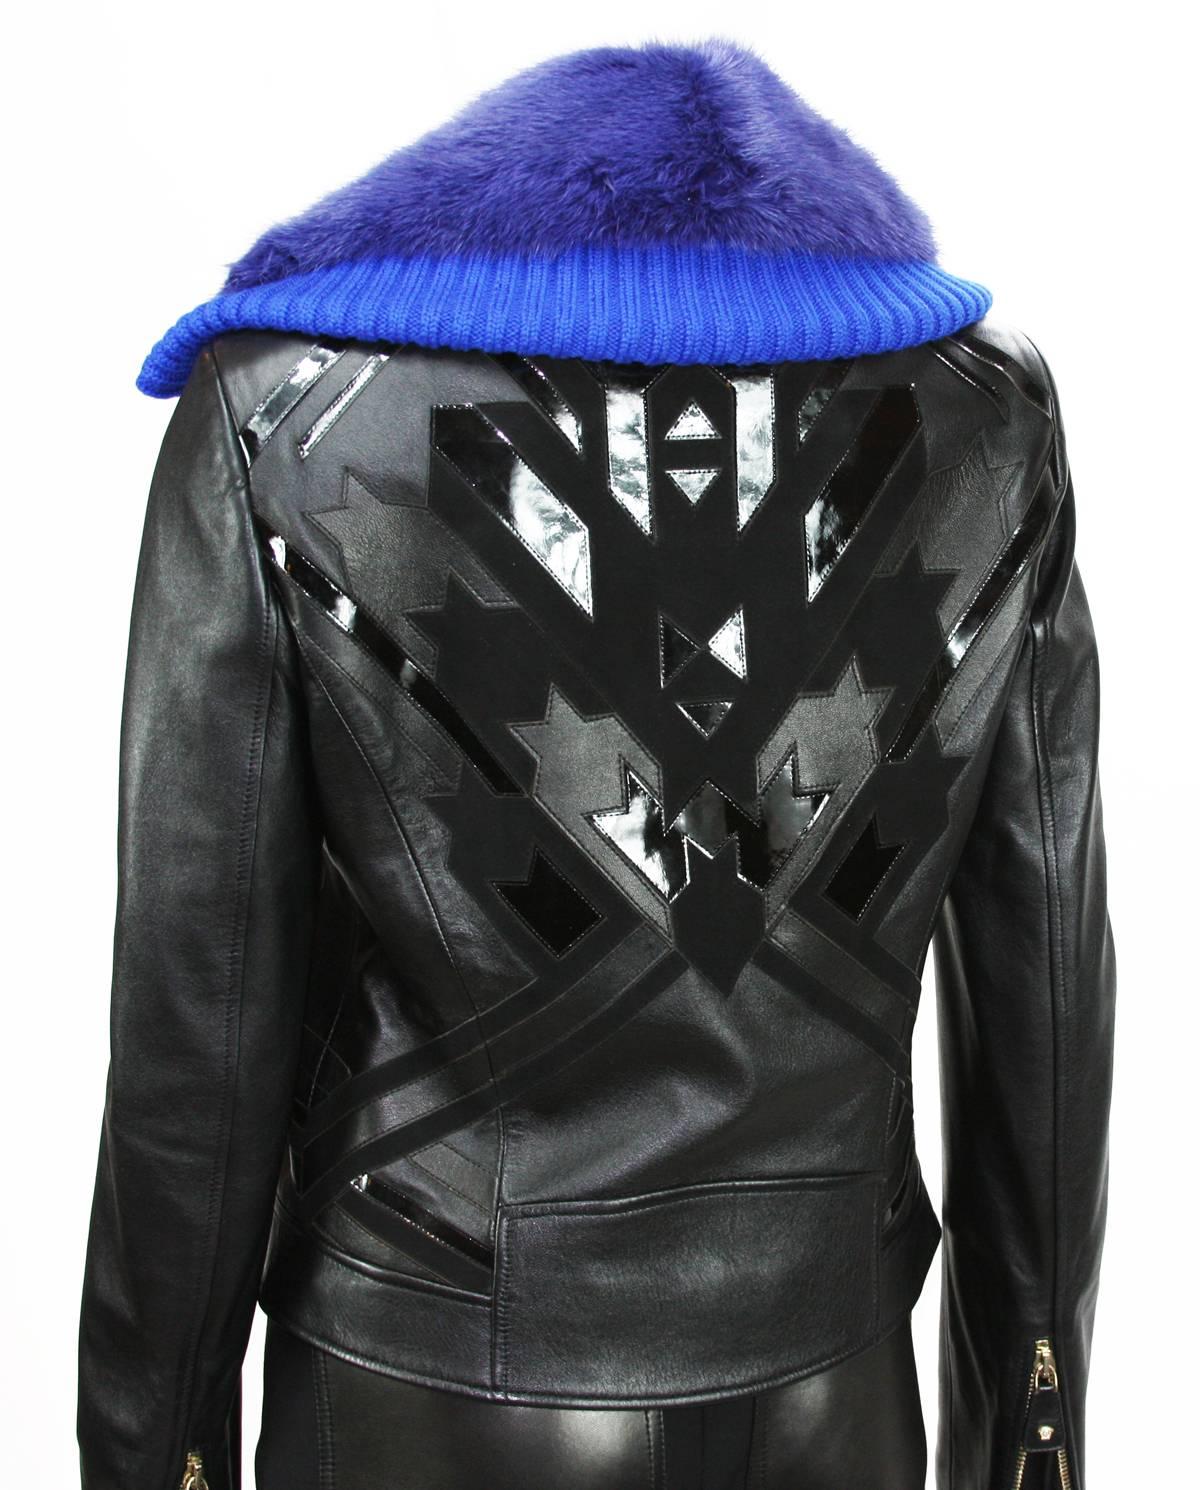 Women's New Versace $8795 Black Leather Moto Jacket with Removable Double Mink Collar 40 For Sale